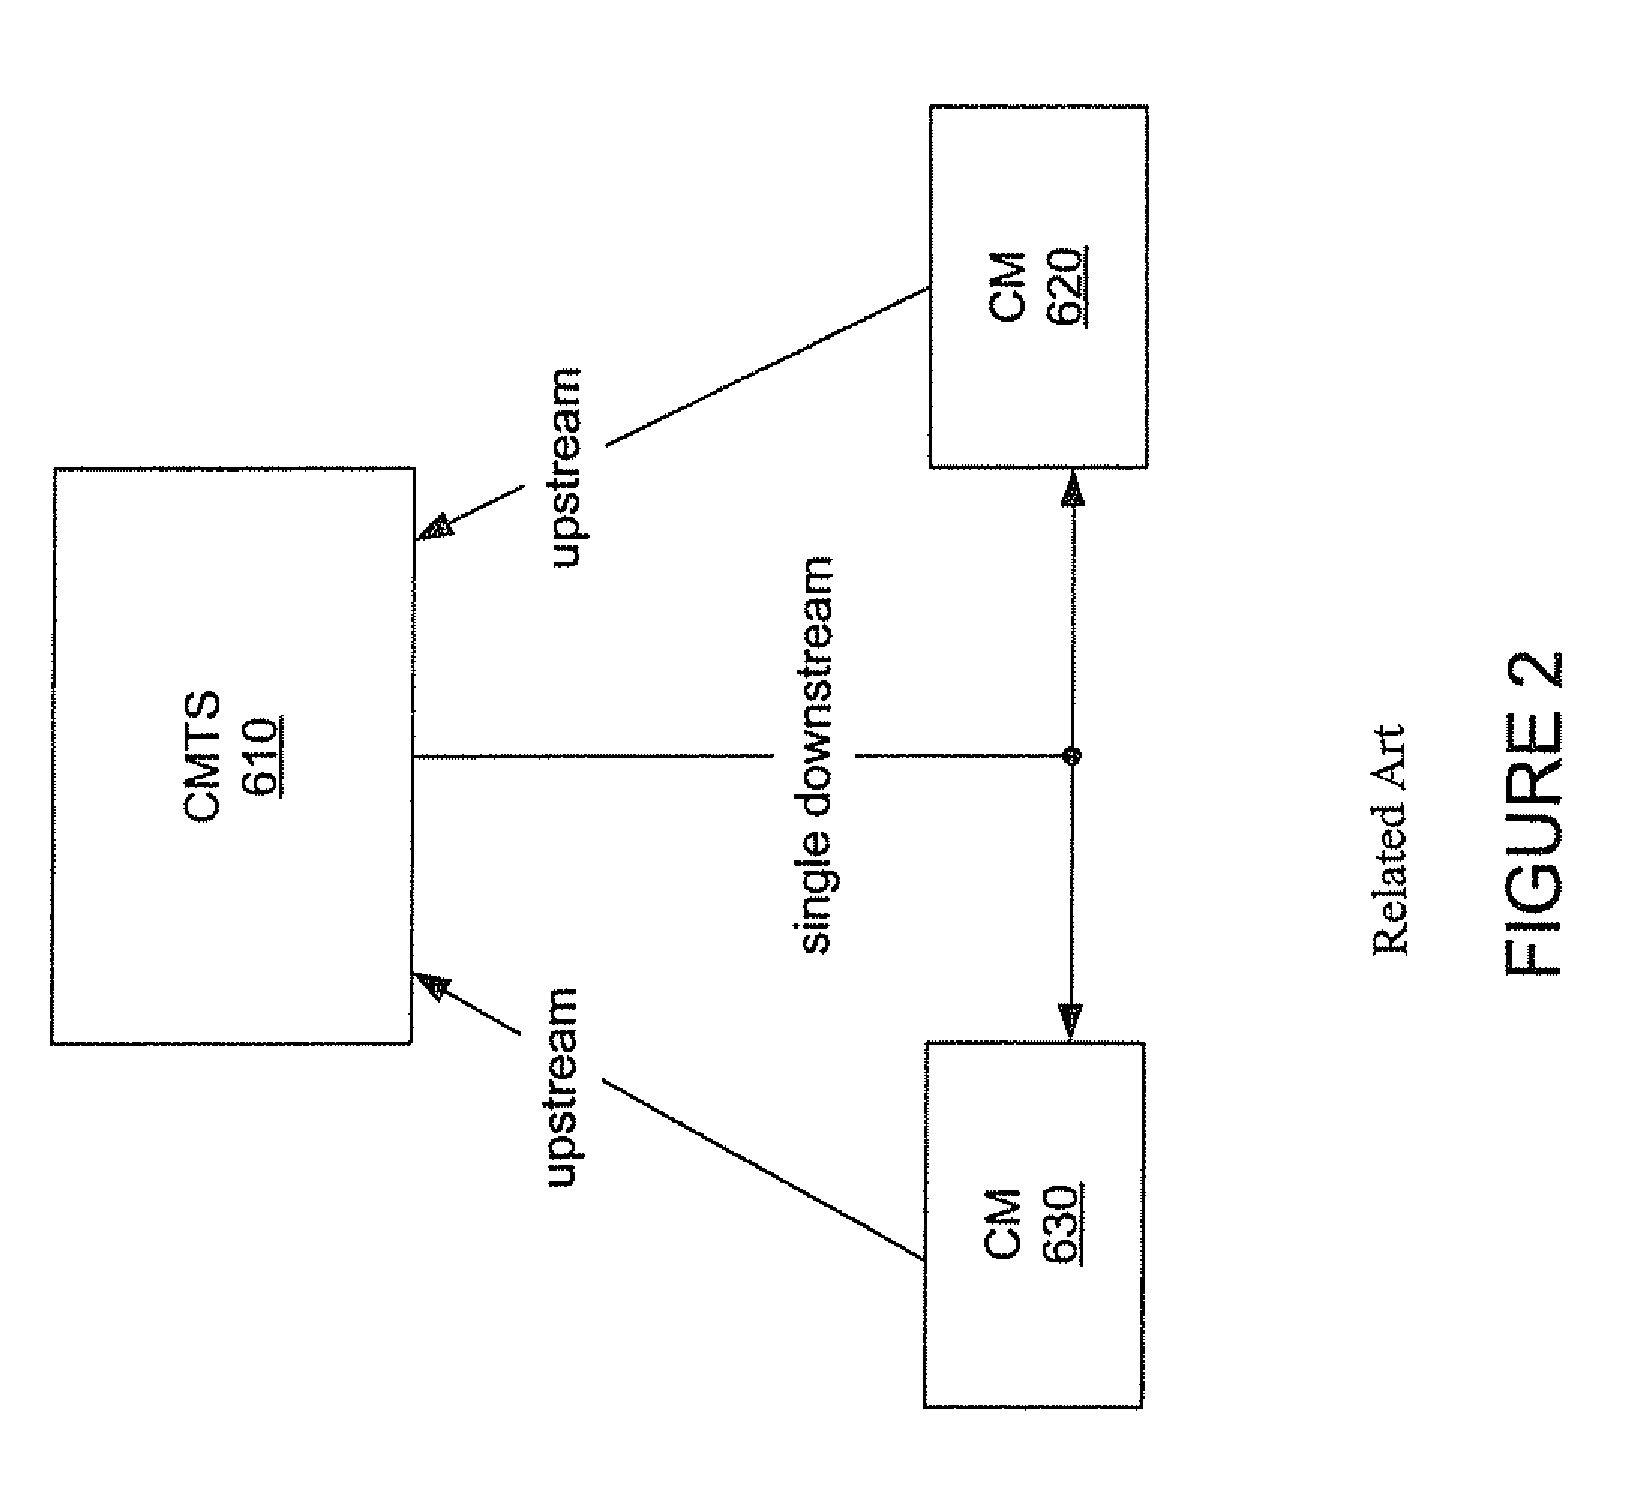 Receiver design for implementing virtual upstream channels in broadband communication systems